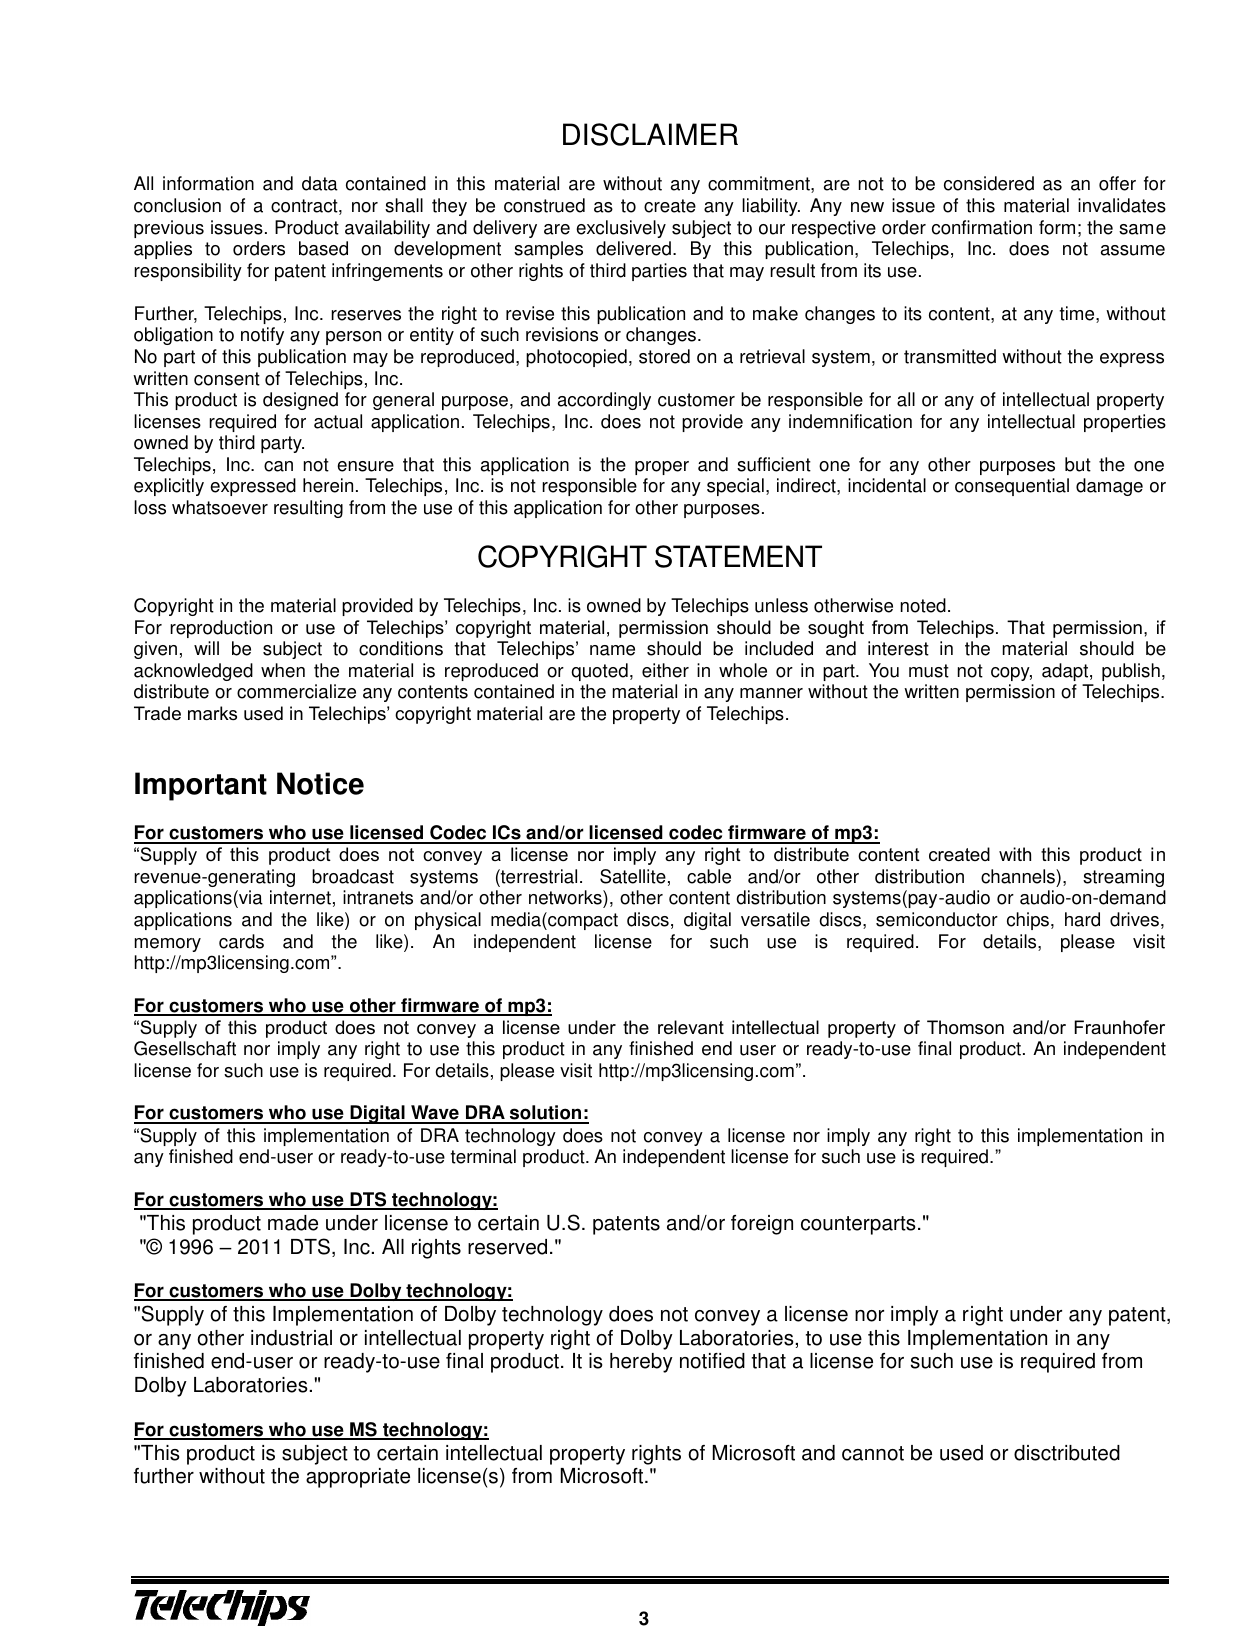      3  DISCLAIMER  All information and data contained in this  material are without any commitment, are not to be considered as an offer for conclusion of a contract, nor shall they be construed as to create any liability. Any new issue of this material invalidates previous issues. Product availability and delivery are exclusively subject to our respective order confirmation form; the same applies  to  orders  based  on  development  samples  delivered.  By  this  publication,  Telechips,  Inc.  does  not  assume responsibility for patent infringements or other rights of third parties that may result from its use.  Further, Telechips, Inc. reserves the right to revise this publication and to make changes to its content, at any time, without obligation to notify any person or entity of such revisions or changes. No part of this publication may be reproduced, photocopied, stored on a retrieval system, or transmitted without the express written consent of Telechips, Inc.   This product is designed for general purpose, and accordingly customer be responsible for all or any of intellectual property licenses required for actual application. Telechips, Inc. does not provide any indemnification for any intellectual properties owned by third party. Telechips,  Inc.  can  not  ensure  that  this  application  is  the  proper  and  sufficient one  for  any  other  purposes  but  the  one explicitly expressed herein. Telechips, Inc. is not responsible for any special, indirect, incidental or consequential damage or loss whatsoever resulting from the use of this application for other purposes.  COPYRIGHT STATEMENT  Copyright in the material provided by Telechips, Inc. is owned by Telechips unless otherwise noted. For reproduction or  use  of  Telechips’ copyright  material, permission  should  be  sought  from  Telechips.  That  permission,  if given,  will  be  subject  to  conditions  that  Telechips’  name  should  be  included  and  interest  in  the  material  should  be acknowledged when the material is reproduced or quoted, either in whole or in part.  You must not copy,  adapt, publish, distribute or commercialize any contents contained in the material in any manner without the written permission of Telechips. Trade marks used in Telechips’ copyright material are the property of Telechips.   Important Notice    For customers who use licensed Codec ICs and/or licensed codec firmware of mp3:   “Supply  of  this  product  does  not  convey  a  license  nor  imply  any  right  to  distribute  content  created  with  this  product  in revenue-generating  broadcast  systems  (terrestrial.  Satellite,  cable  and/or  other  distribution  channels),  streaming applications(via internet, intranets and/or other networks), other content distribution systems(pay-audio or audio-on-demand applications  and  the  like)  or  on  physical  media(compact  discs,  digital  versatile  discs,  semiconductor  chips,  hard  drives, memory  cards  and  the  like).  An  independent  license  for  such  use  is  required.  For  details,  please  visit http://mp3licensing.com”.  For customers who use other firmware of mp3: “Supply  of  this  product  does  not  convey  a  license  under  the  relevant  intellectual  property  of  Thomson  and/or  Fraunhofer Gesellschaft nor imply any right to use this product in any finished end user or ready-to-use final product. An independent license for such use is required. For details, please visit http://mp3licensing.com”.  For customers who use Digital Wave DRA solution: “Supply of this implementation of DRA technology does not convey a license nor imply any right to this implementation in any finished end-user or ready-to-use terminal product. An independent license for such use is required.”  For customers who use DTS technology:  &quot;This product made under license to certain U.S. patents and/or foreign counterparts.&quot;  &quot;©  1996 – 2011 DTS, Inc. All rights reserved.&quot;    For customers who use Dolby technology: &quot;Supply of this Implementation of Dolby technology does not convey a license nor imply a right under any patent, or any other industrial or intellectual property right of Dolby Laboratories, to use this Implementation in any finished end-user or ready-to-use final product. It is hereby notified that a license for such use is required from Dolby Laboratories.&quot;  For customers who use MS technology: &quot;This product is subject to certain intellectual property rights of Microsoft and cannot be used or disctributed further without the appropriate license(s) from Microsoft.&quot;    